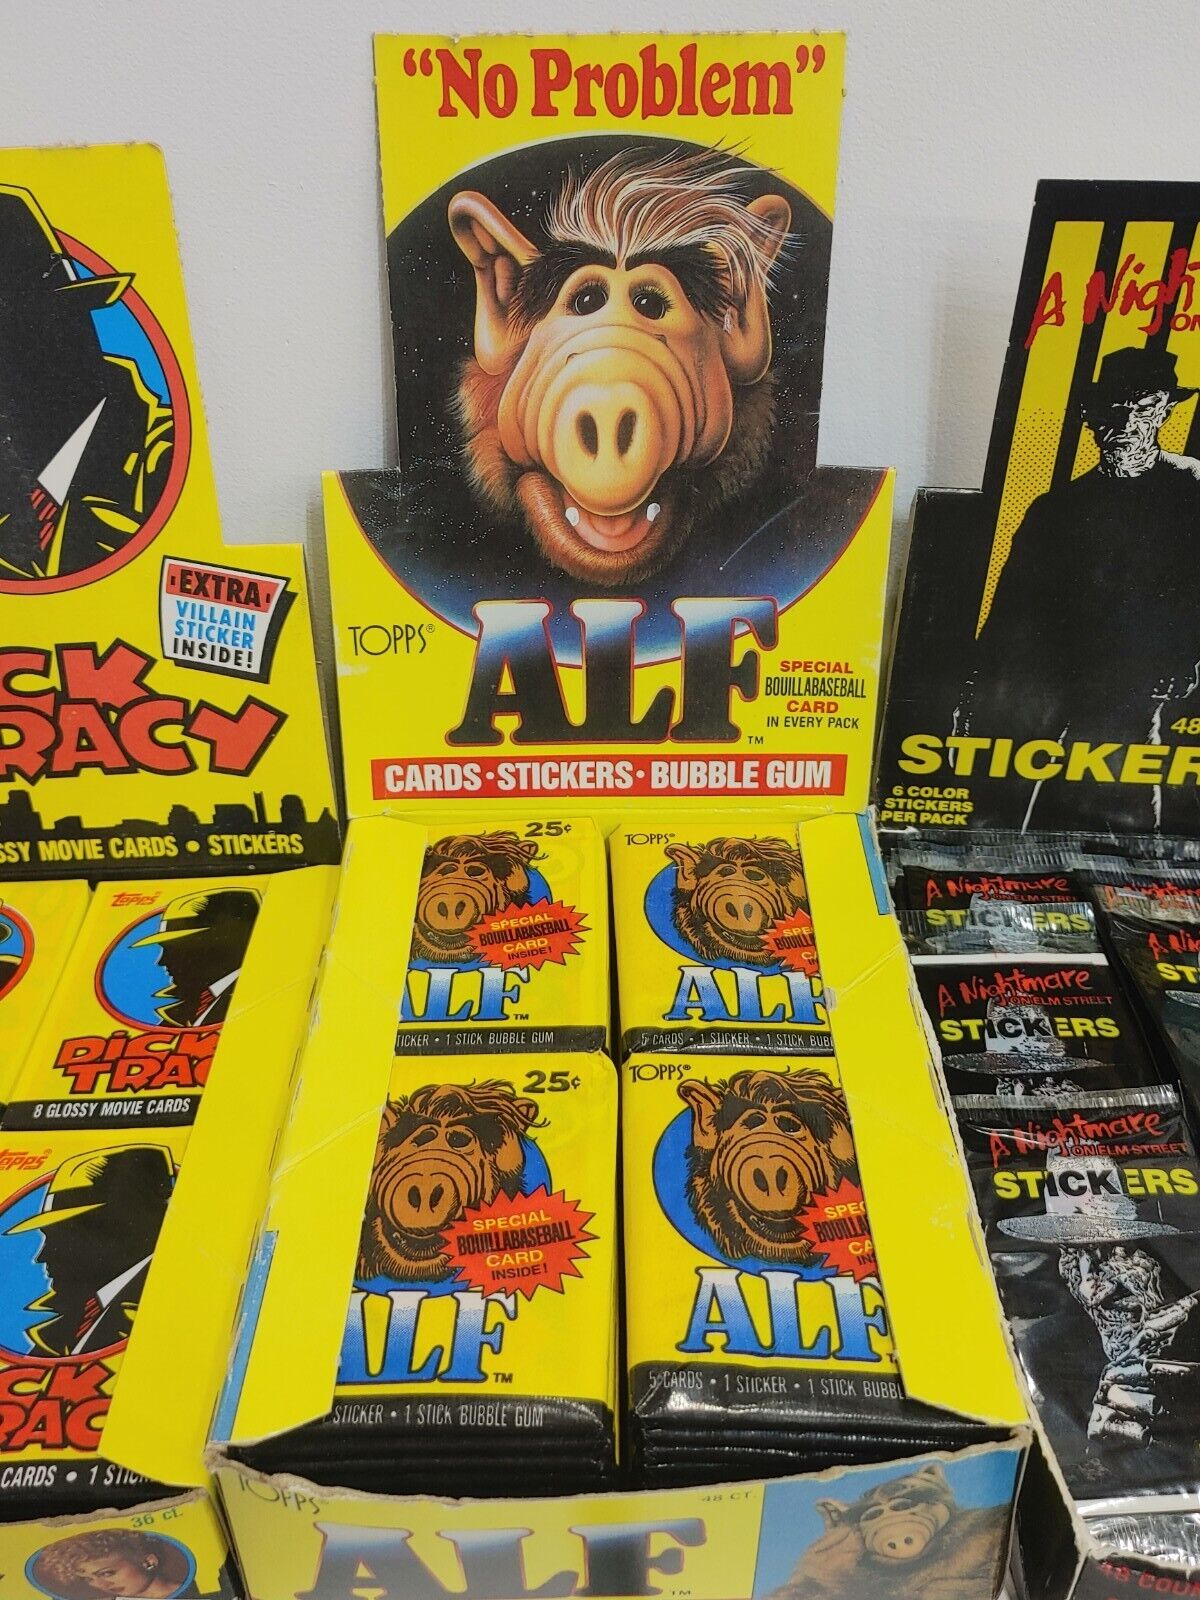 1987 Topps No Problem Alf Series 1 Trading Card Wax Pack - Quantity Available 